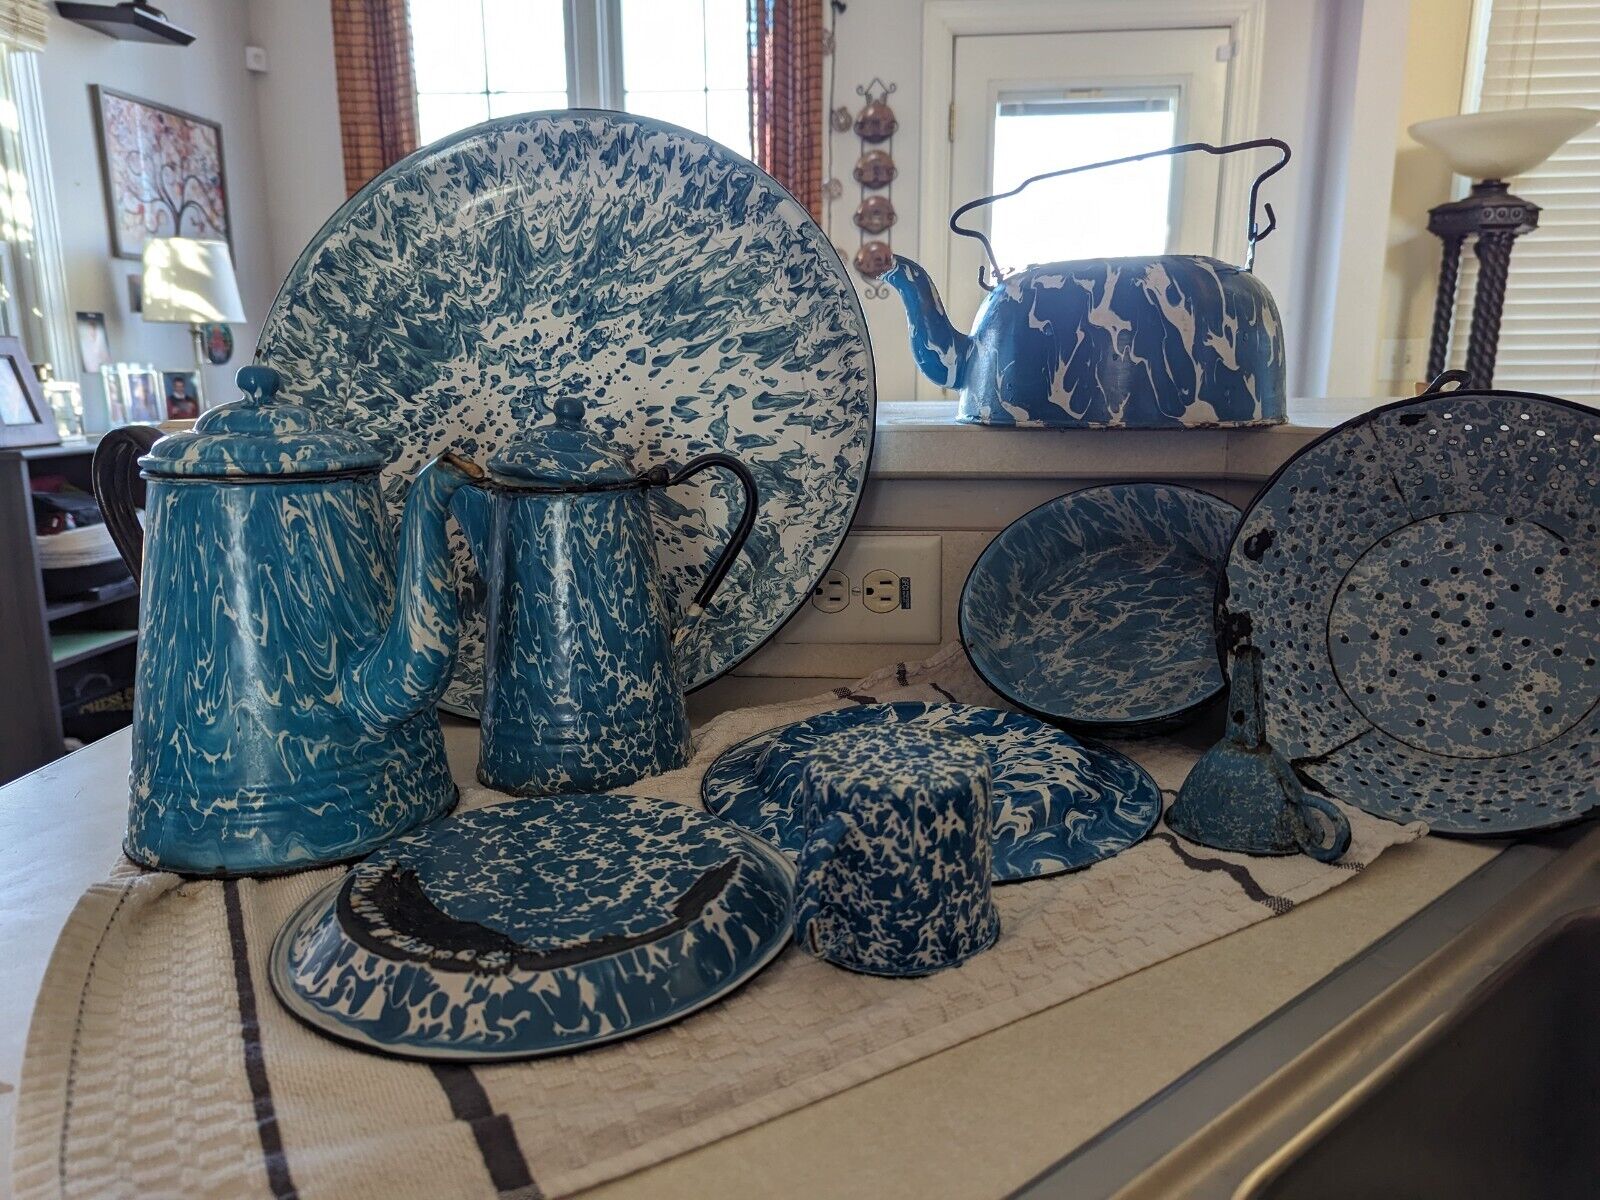 10 Pc Antique, Early 20th Century Blue & White Graniteware, Plates, Pans, Kettle